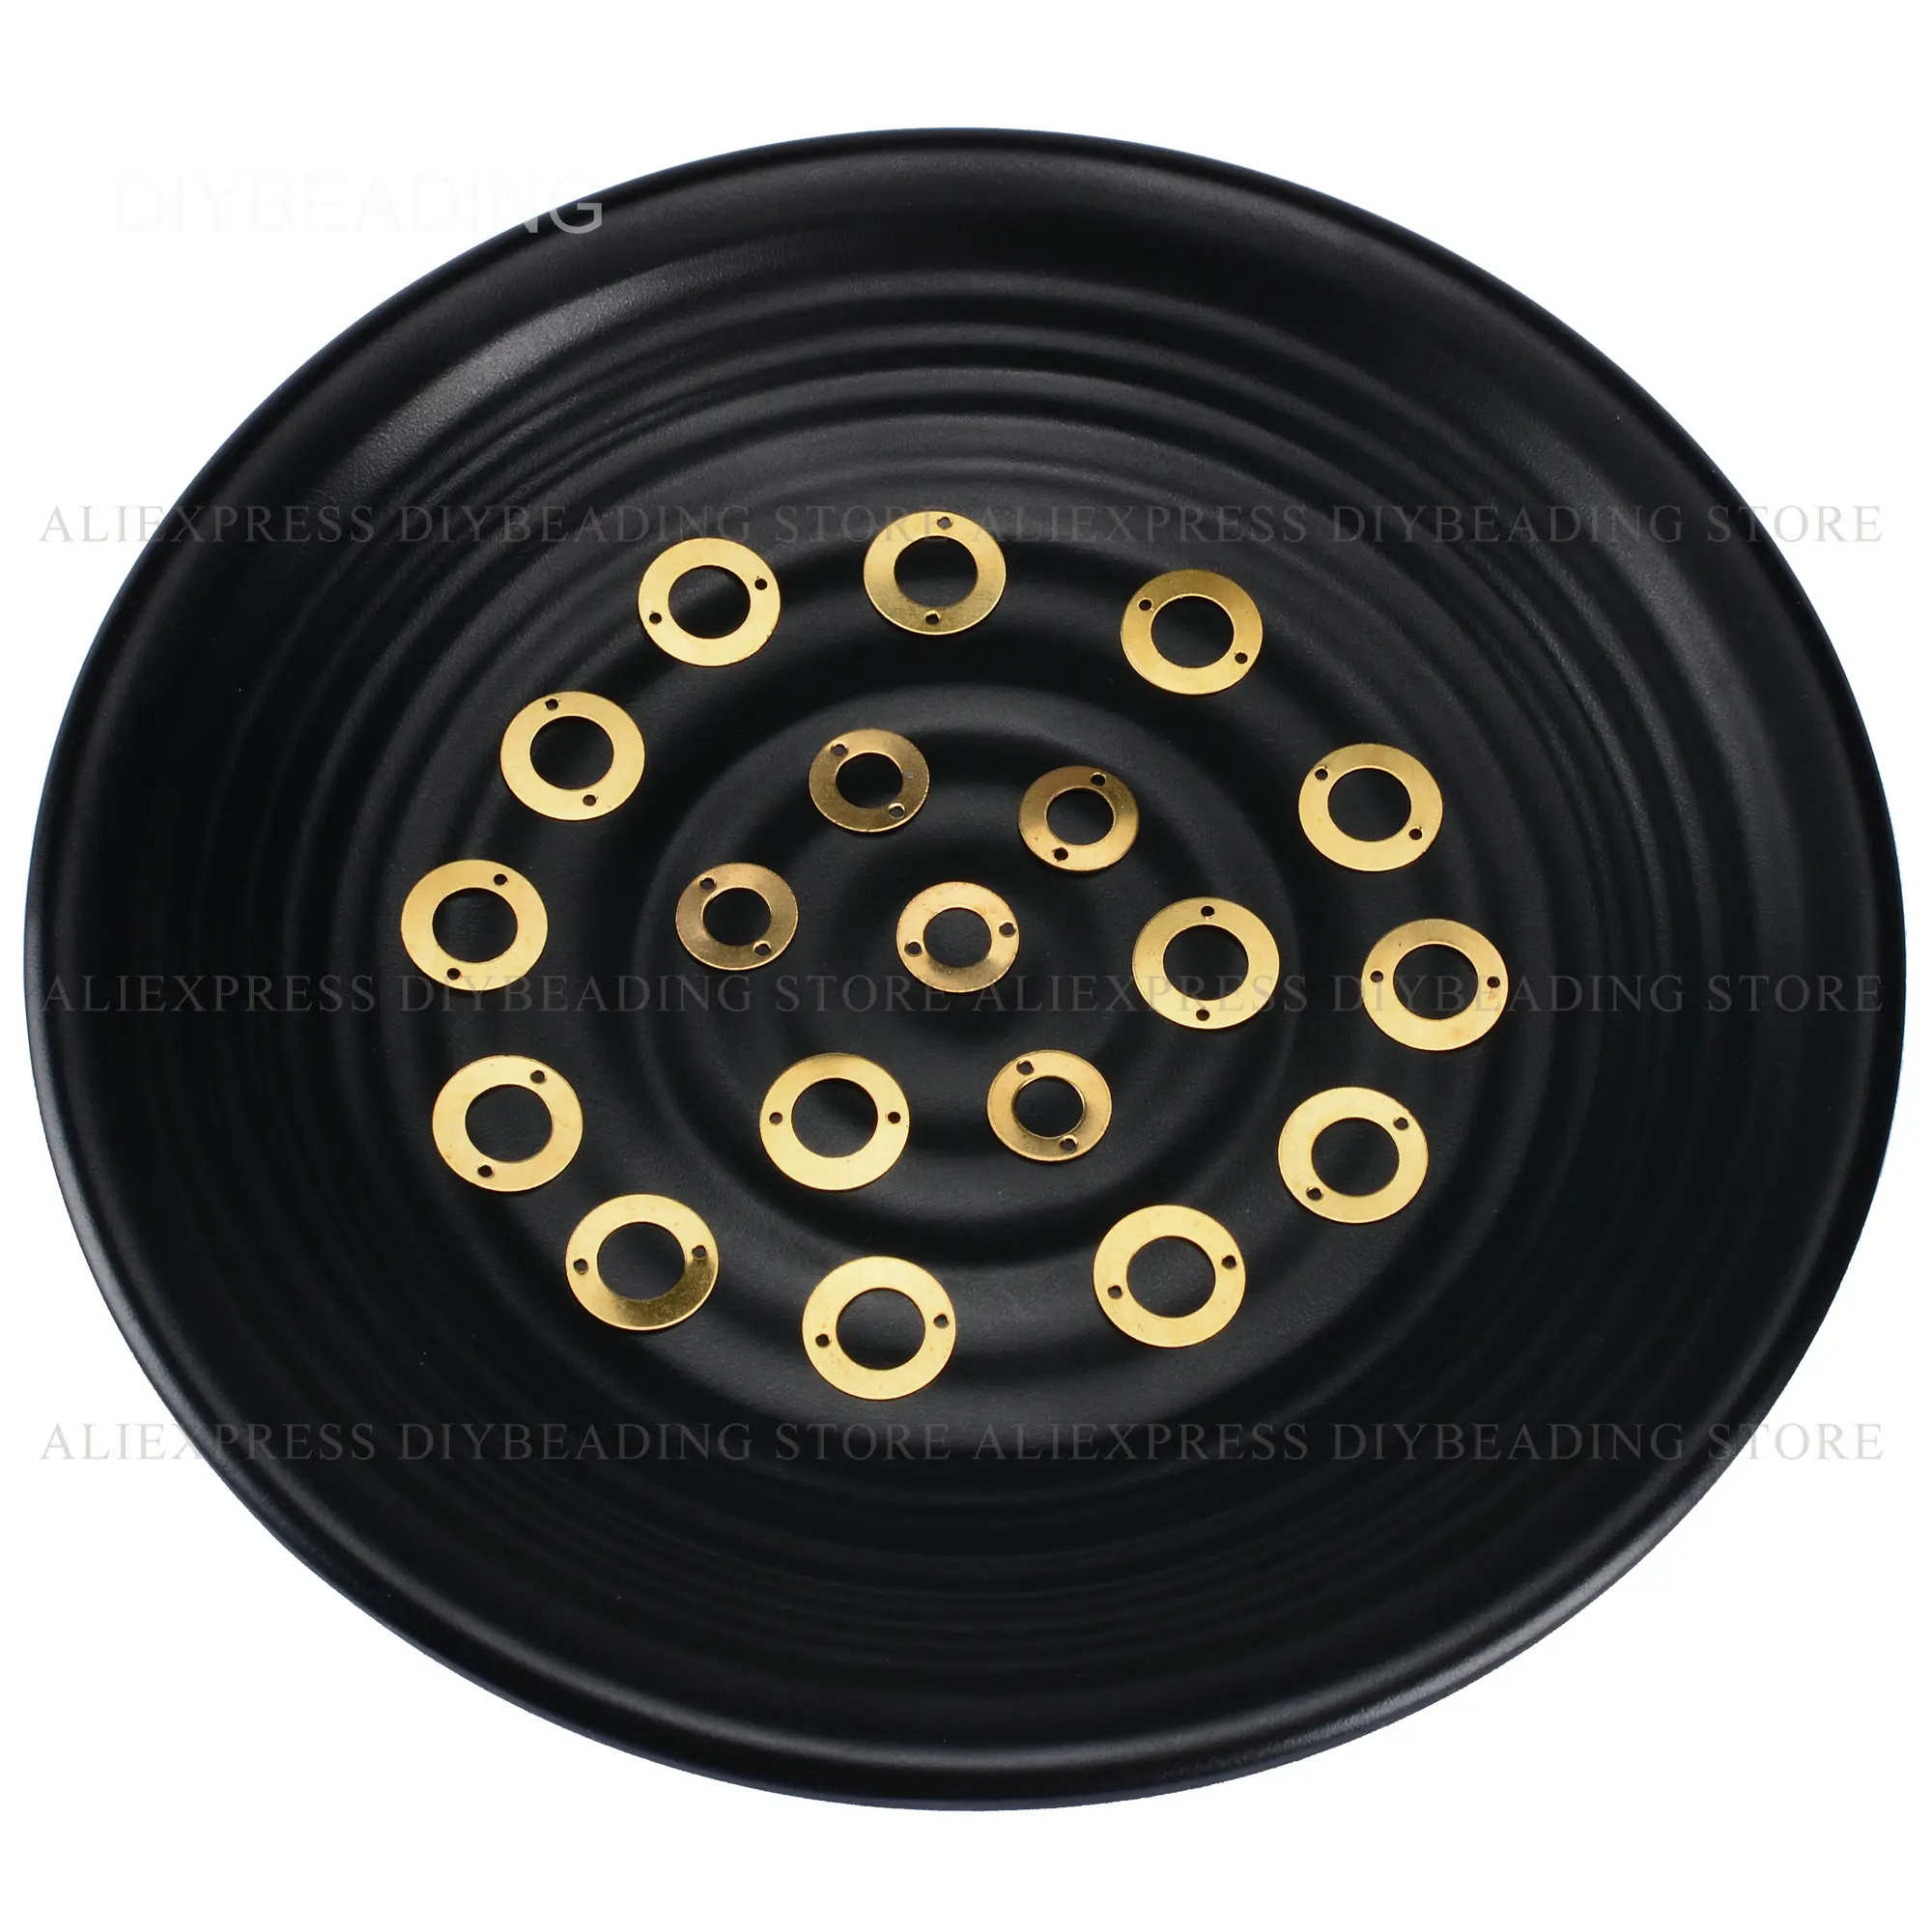 

100-1000 Pcs Brass Finding for Jewelry Making Flat Round Disc Circle Donut Connector Component Lots Wholesale (2 Hole Very Thin)